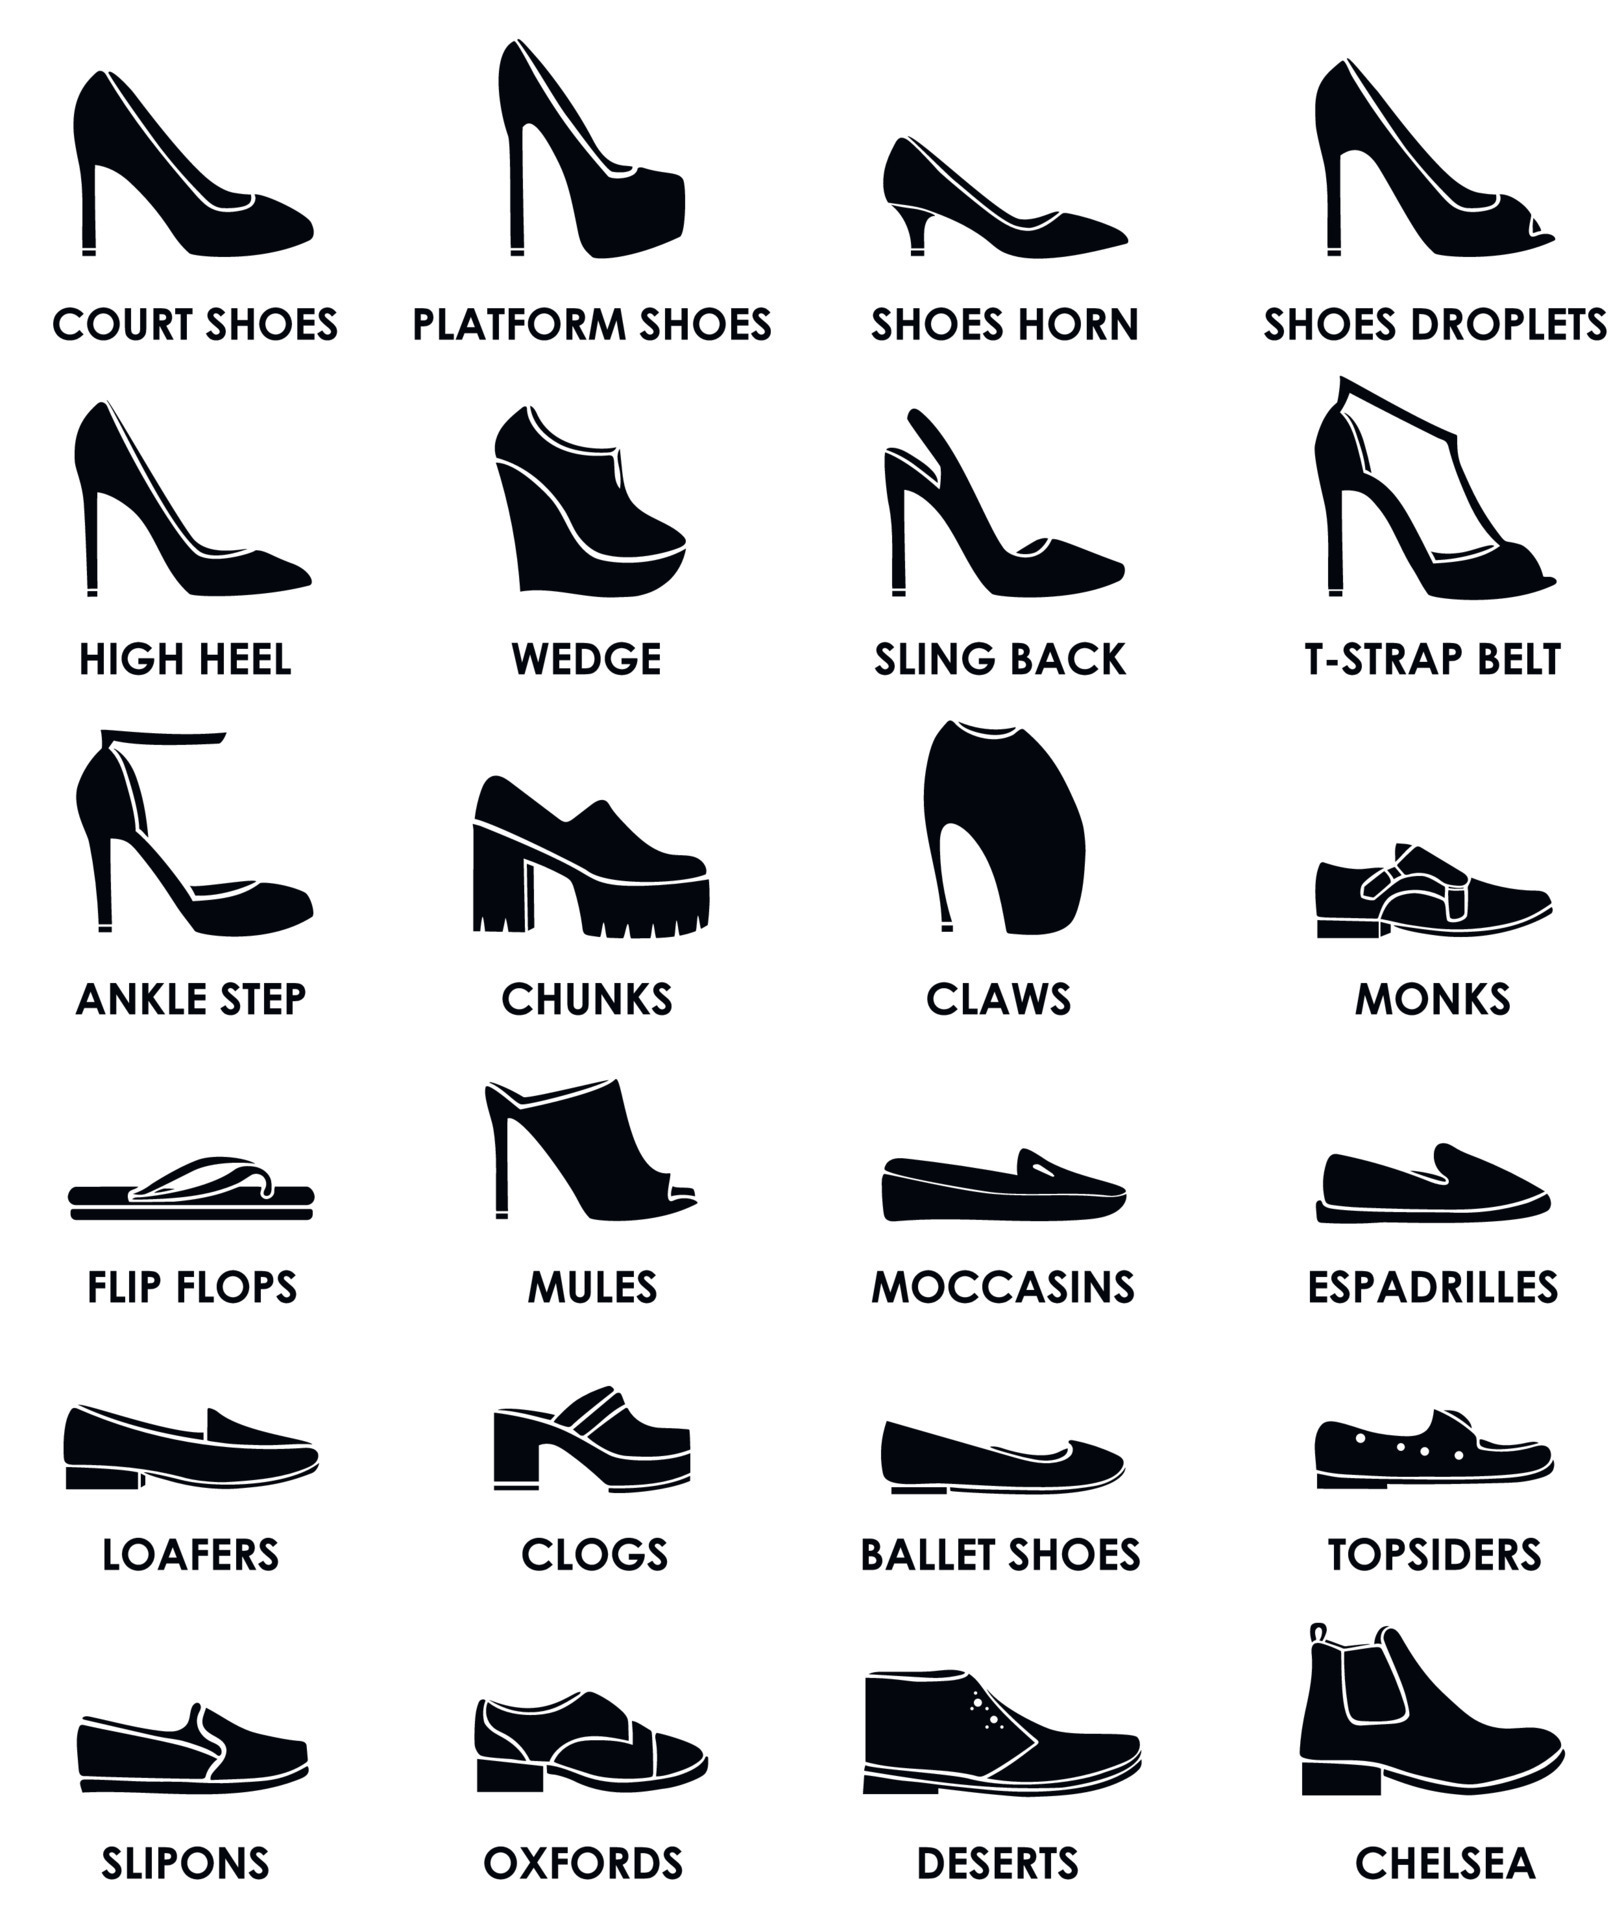 Shoes set. Types and styles of shoes executed as icons for fashion web ...